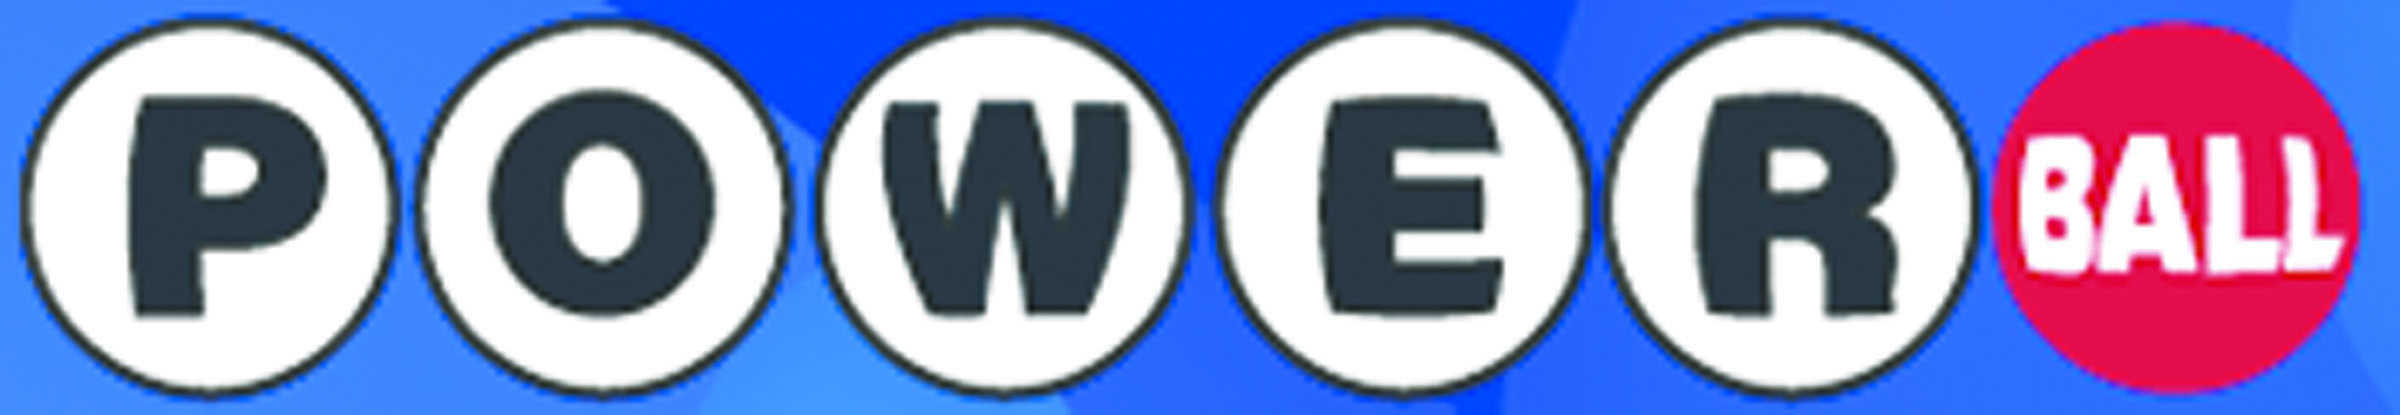 Up, up and up!  Powerball jackpot for Saturday at $203 million